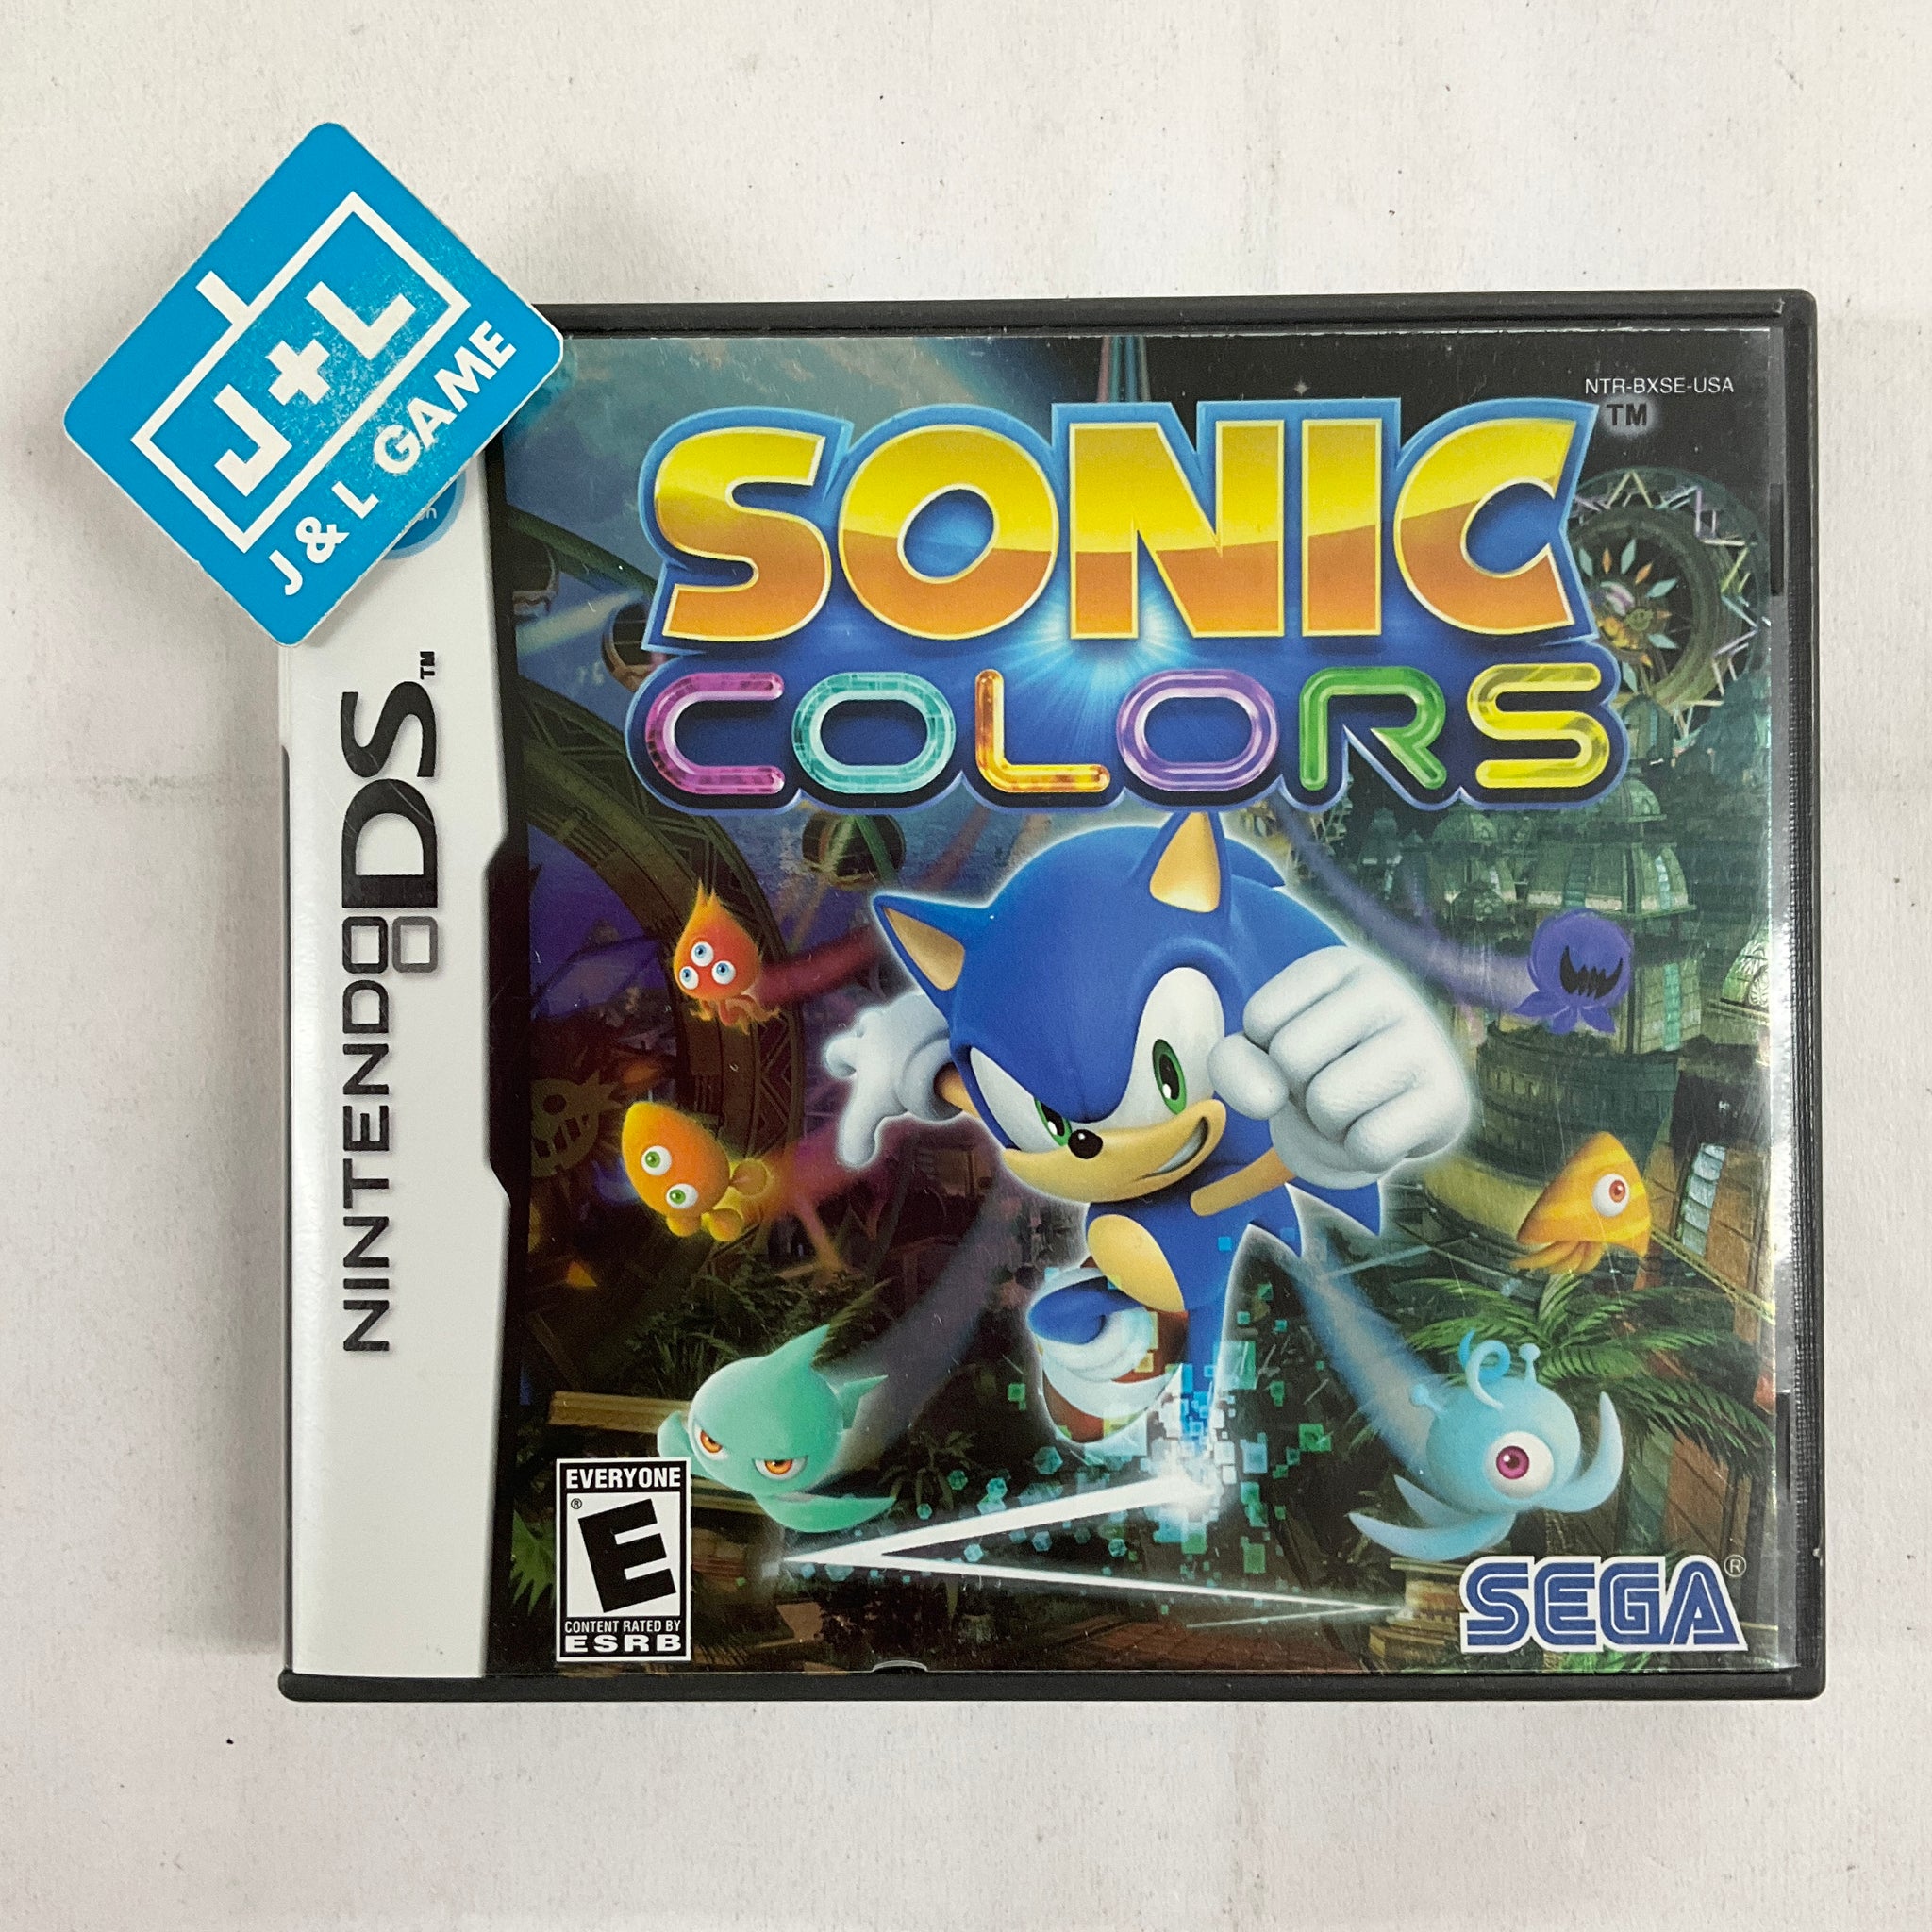 Sonic Colors Nintendo DS Game Complete CIB Authentic Tested and Working  NDS176